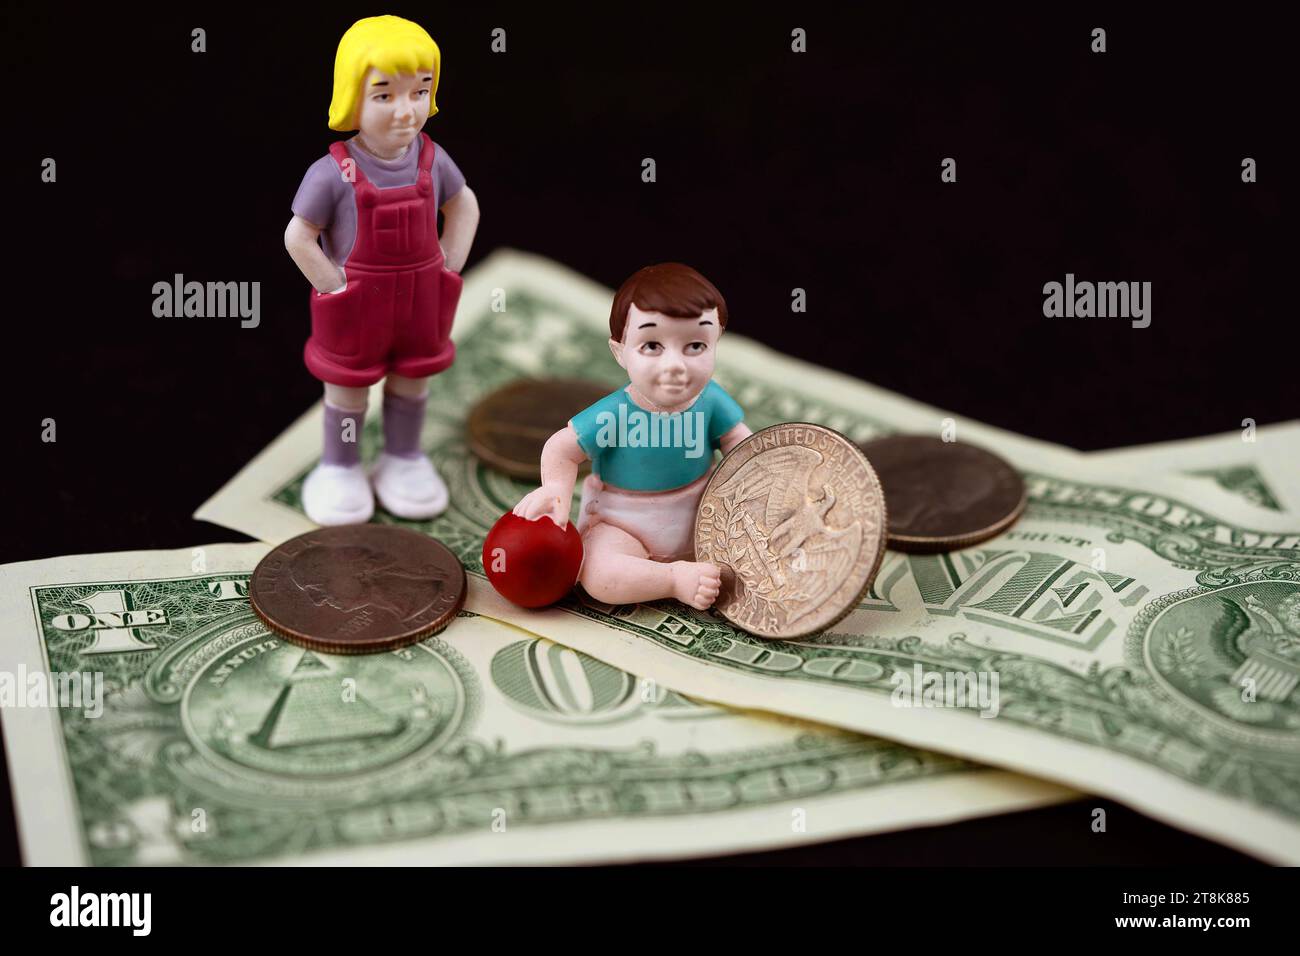 children are financially supported, child benefit, symbolic image Stock Photo